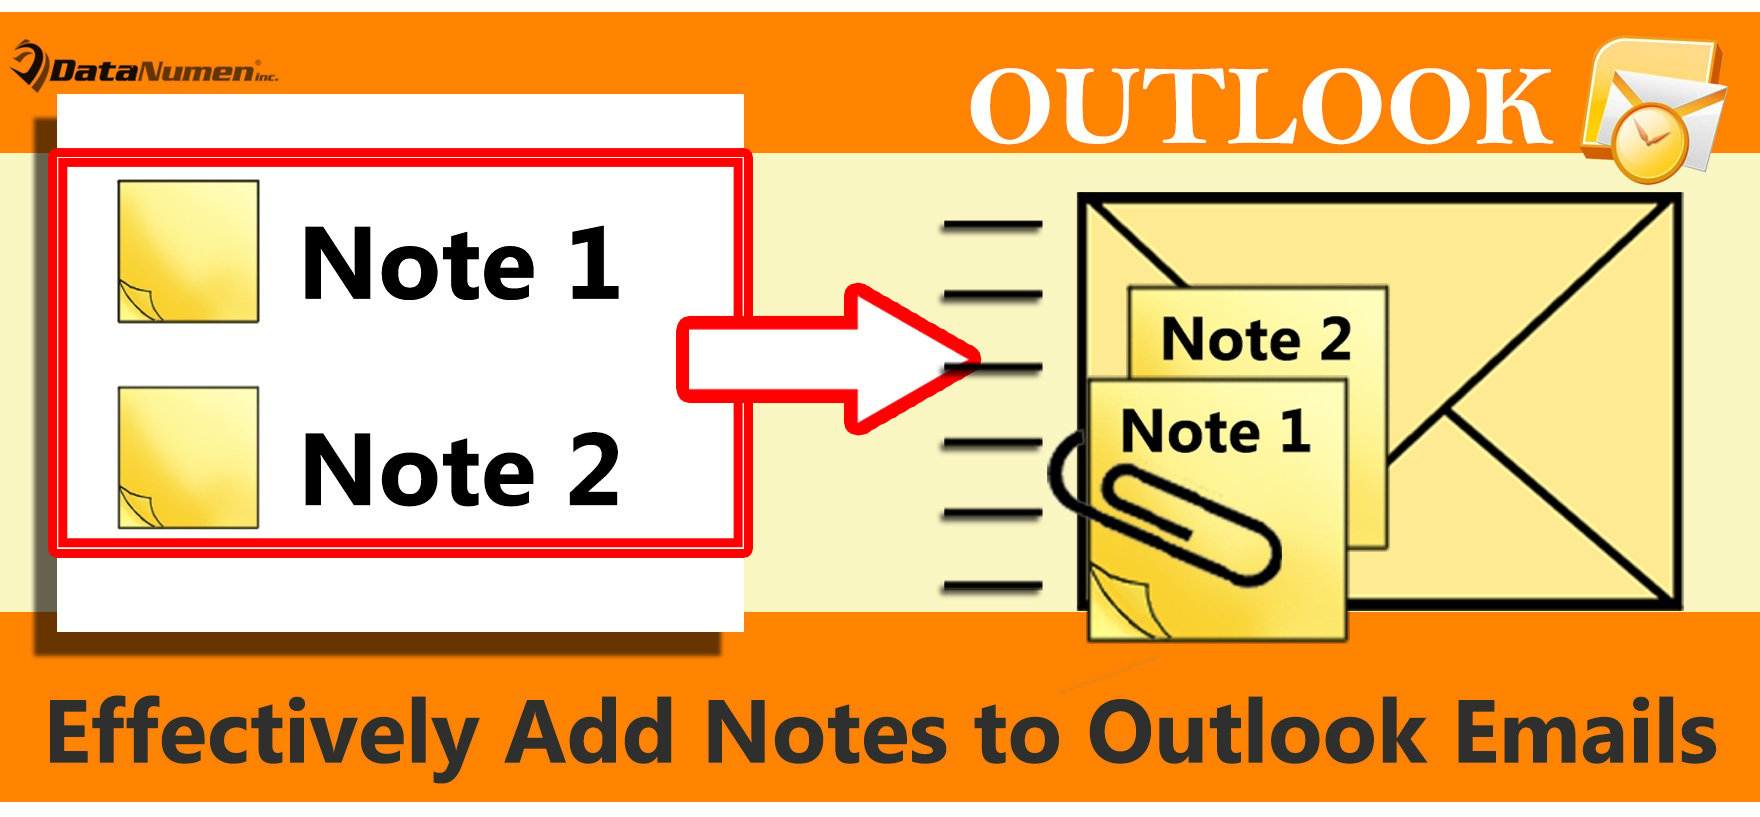 Effectively Add Notes to Outlook Emails via VBA & UserForm